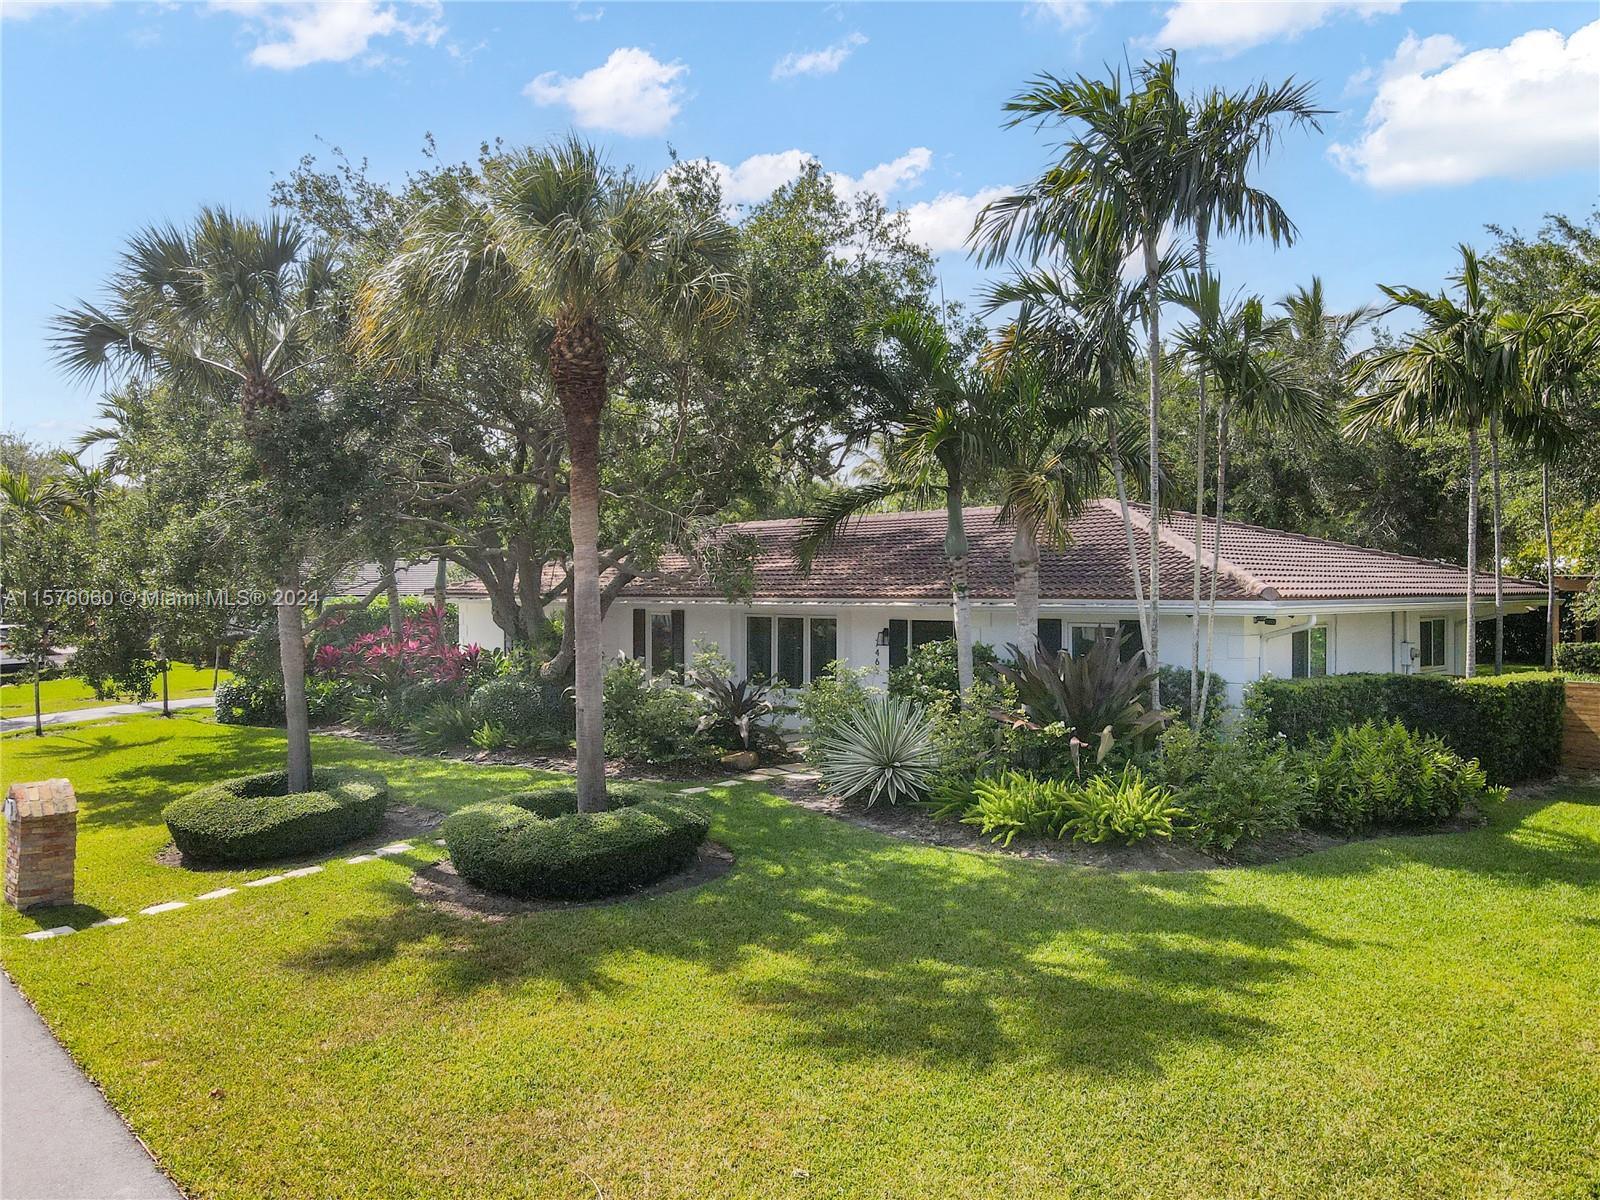 Located in the prestigious Hillary Estates First Add subdivision, Walking distance from Deering Esta